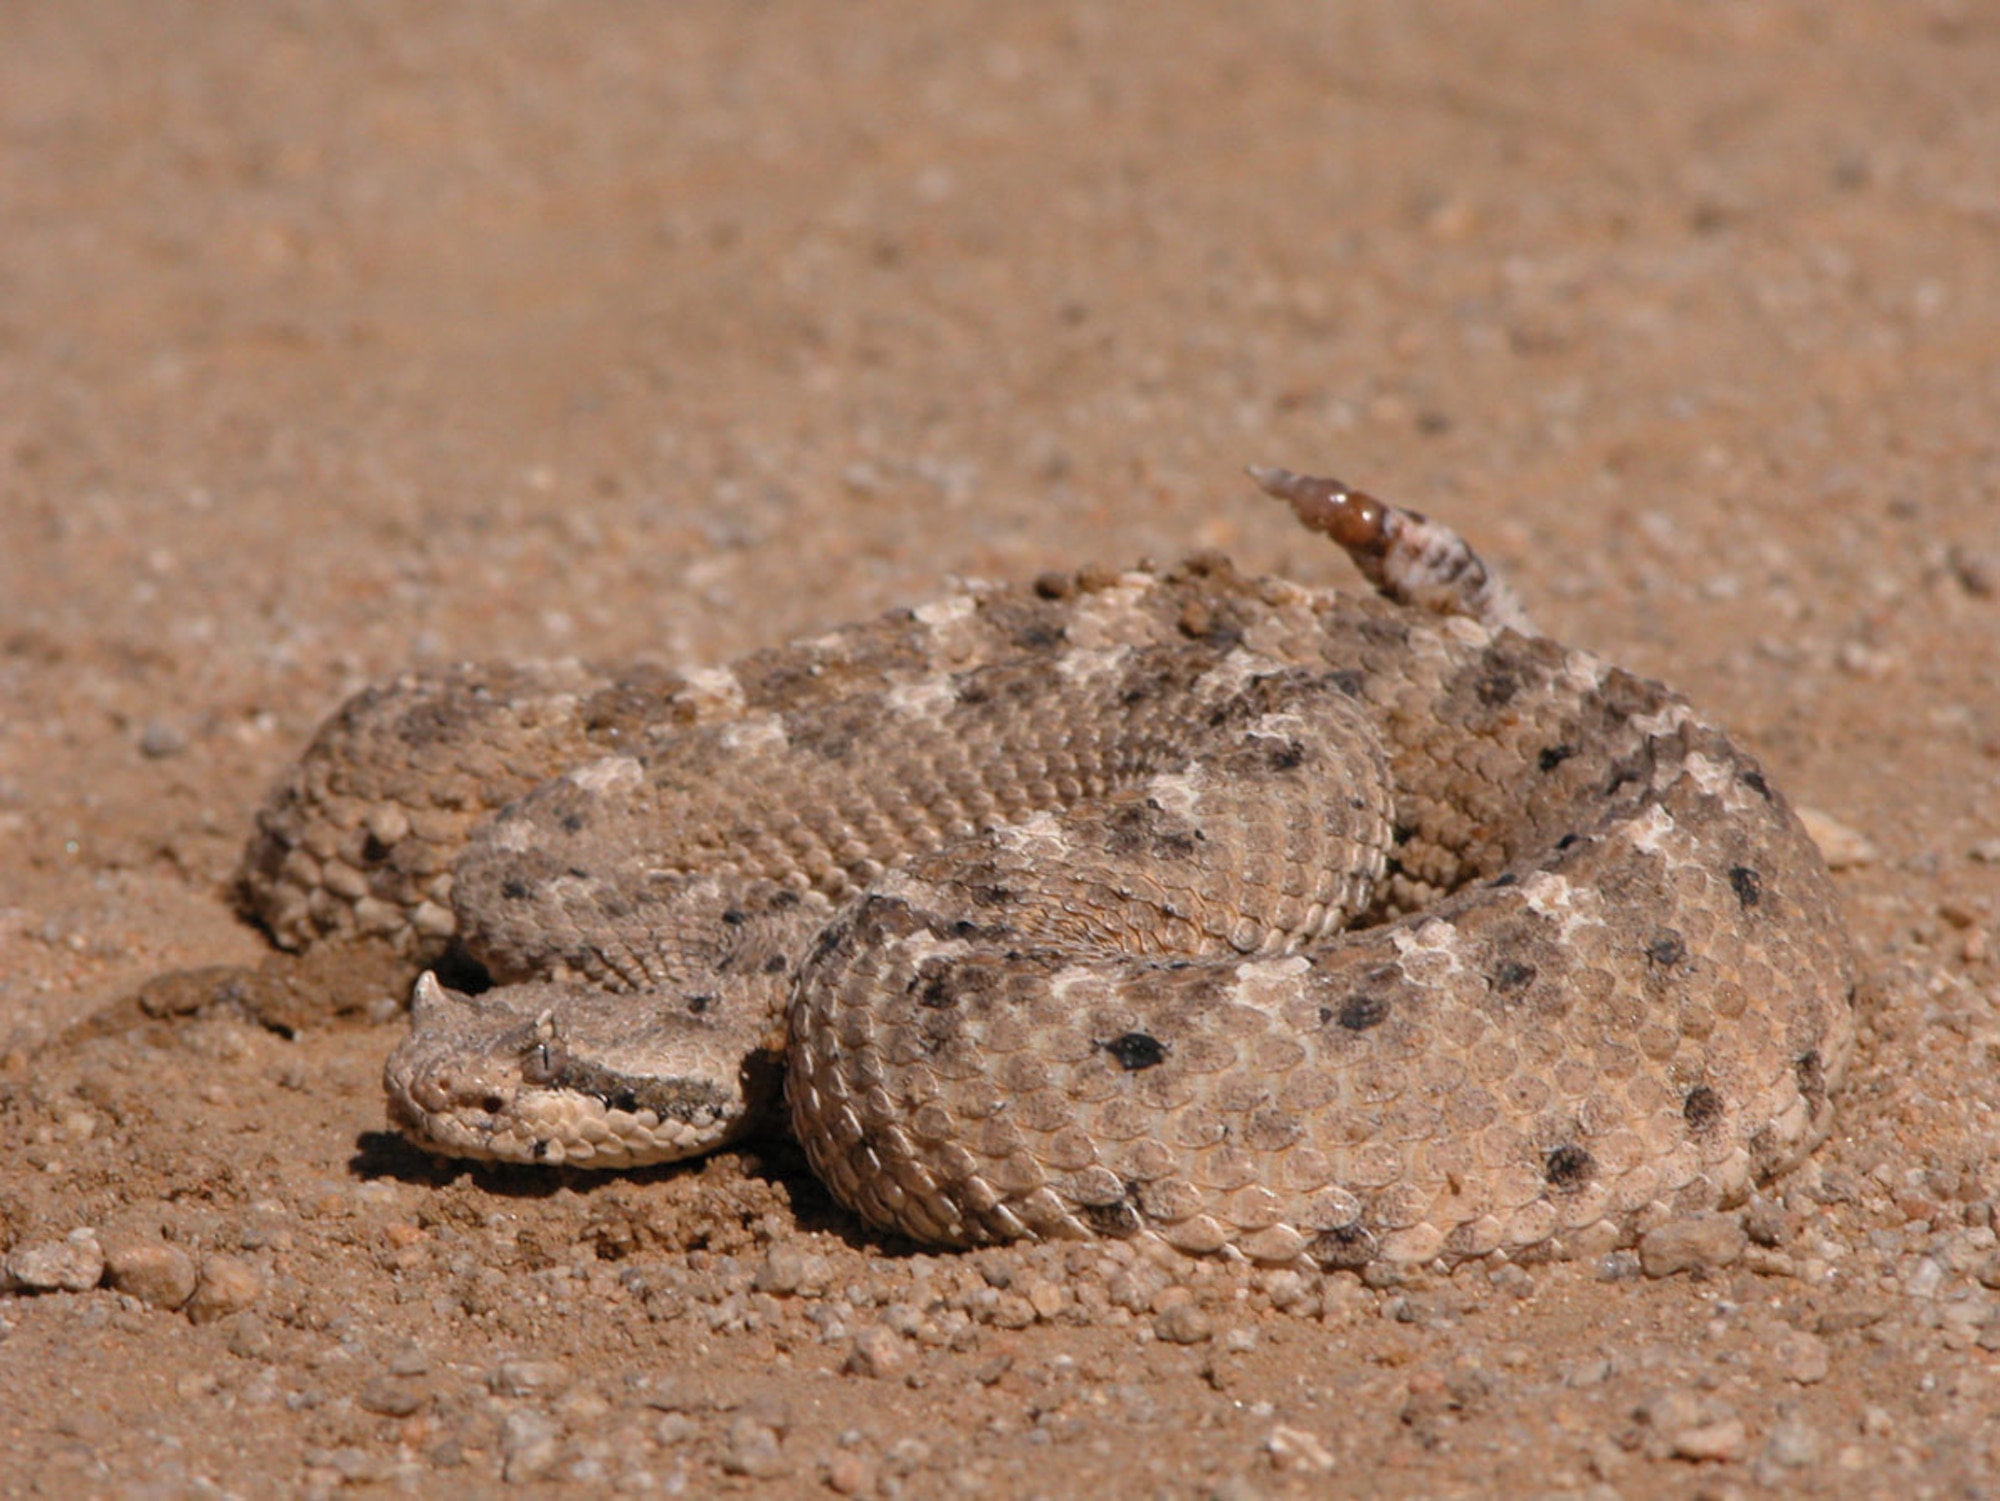 The poisonous sidewinder rattlesnake is one of the many reptiles common to the Mojave Desert area. Other snakes seen here are the Mojave green rattlesnake, the California king snake and the gopher snake. (Photo by Mark Bratton)